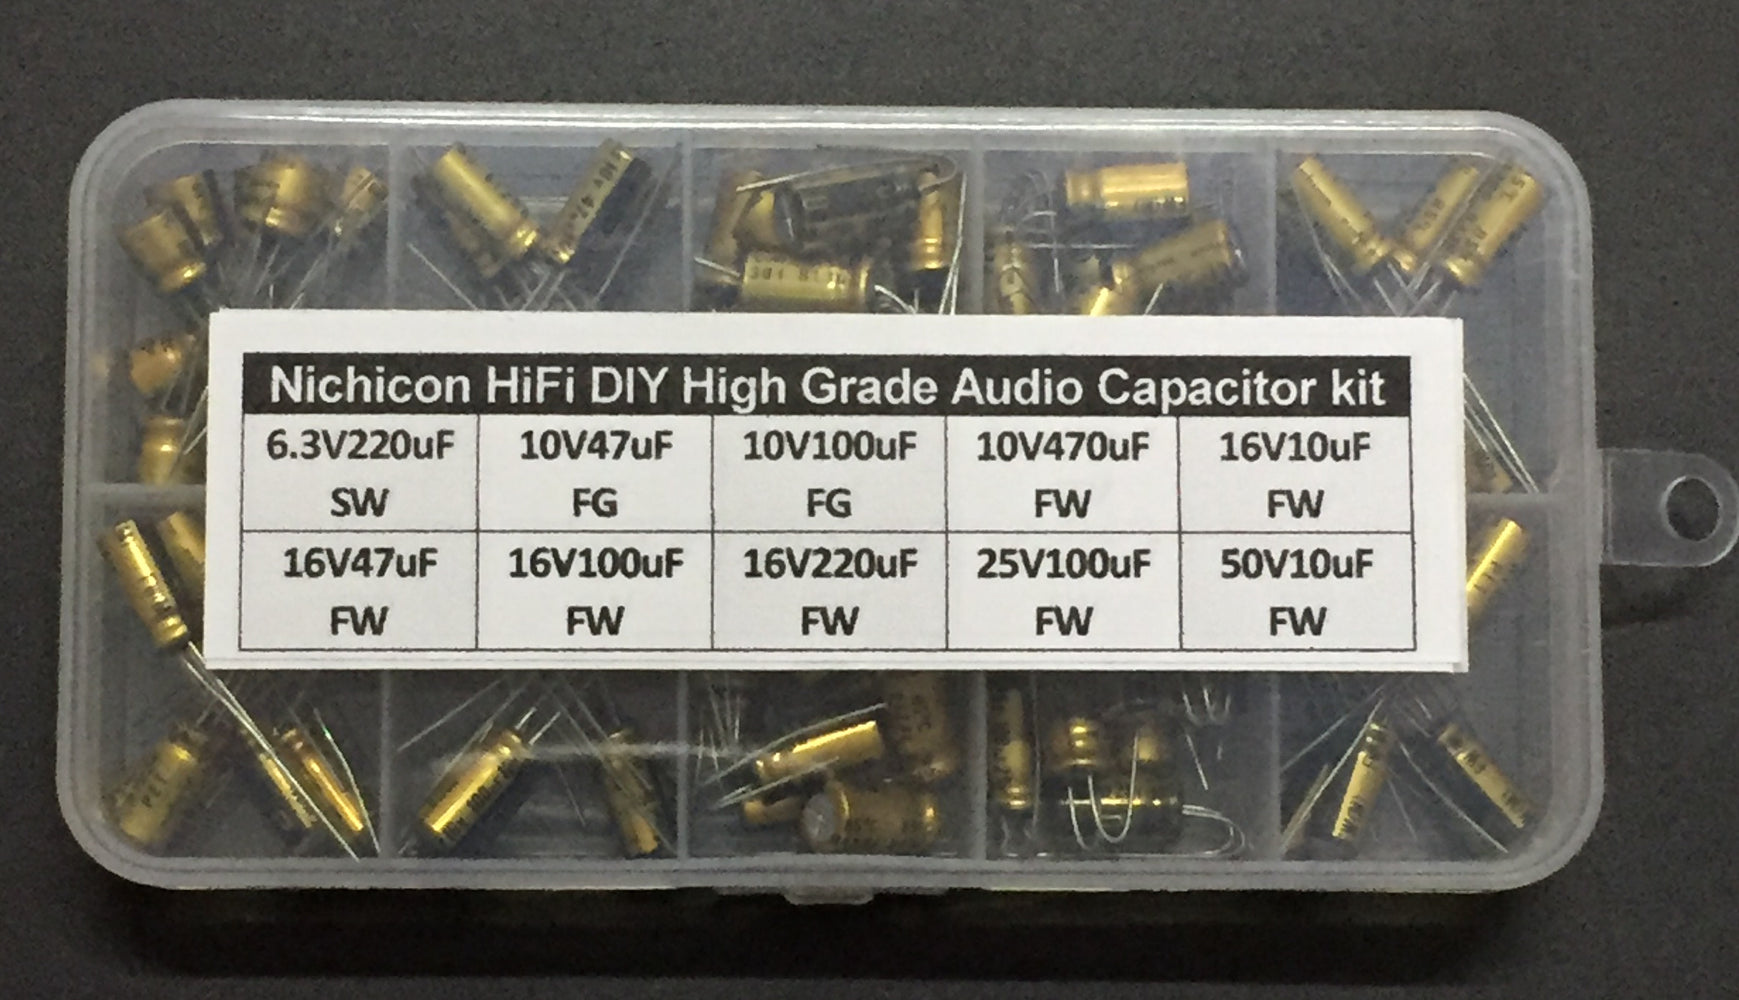 Quality High Grade HiFi Nichicon Audio Capacitor Assorted Kit - 100 Pieces from PMD Way with free delivery worldwide